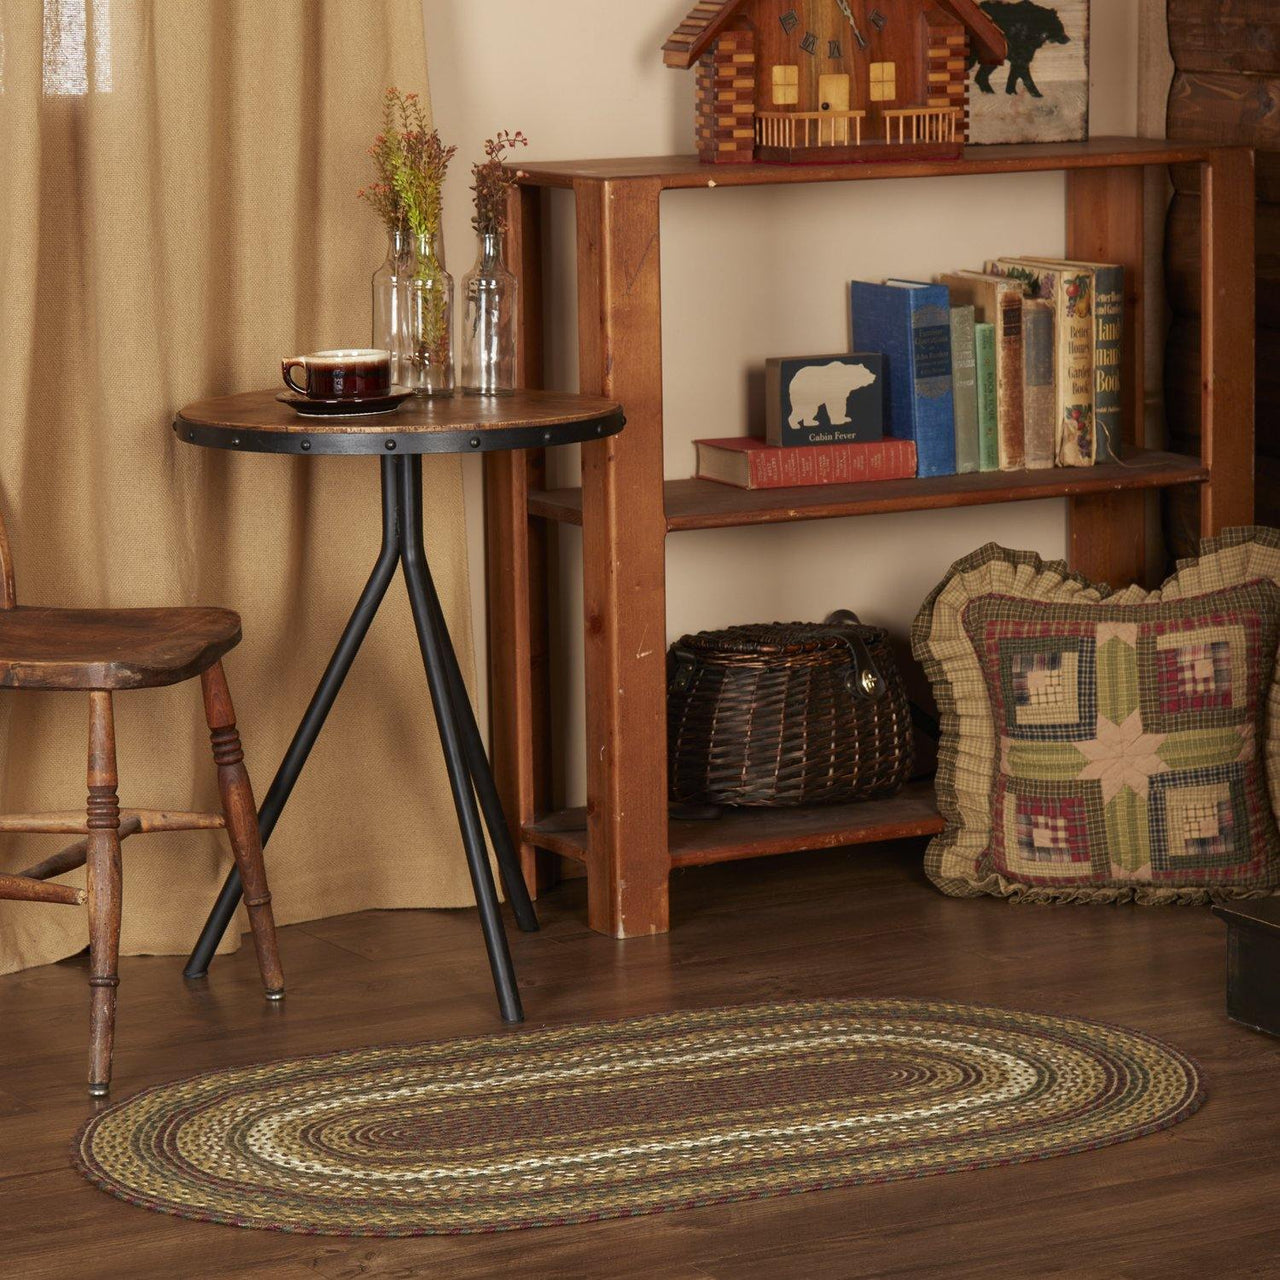 Tea Cabin Jute Braided Rug Oval 27"x48" with Rug Pad VHC Brands - The Fox Decor